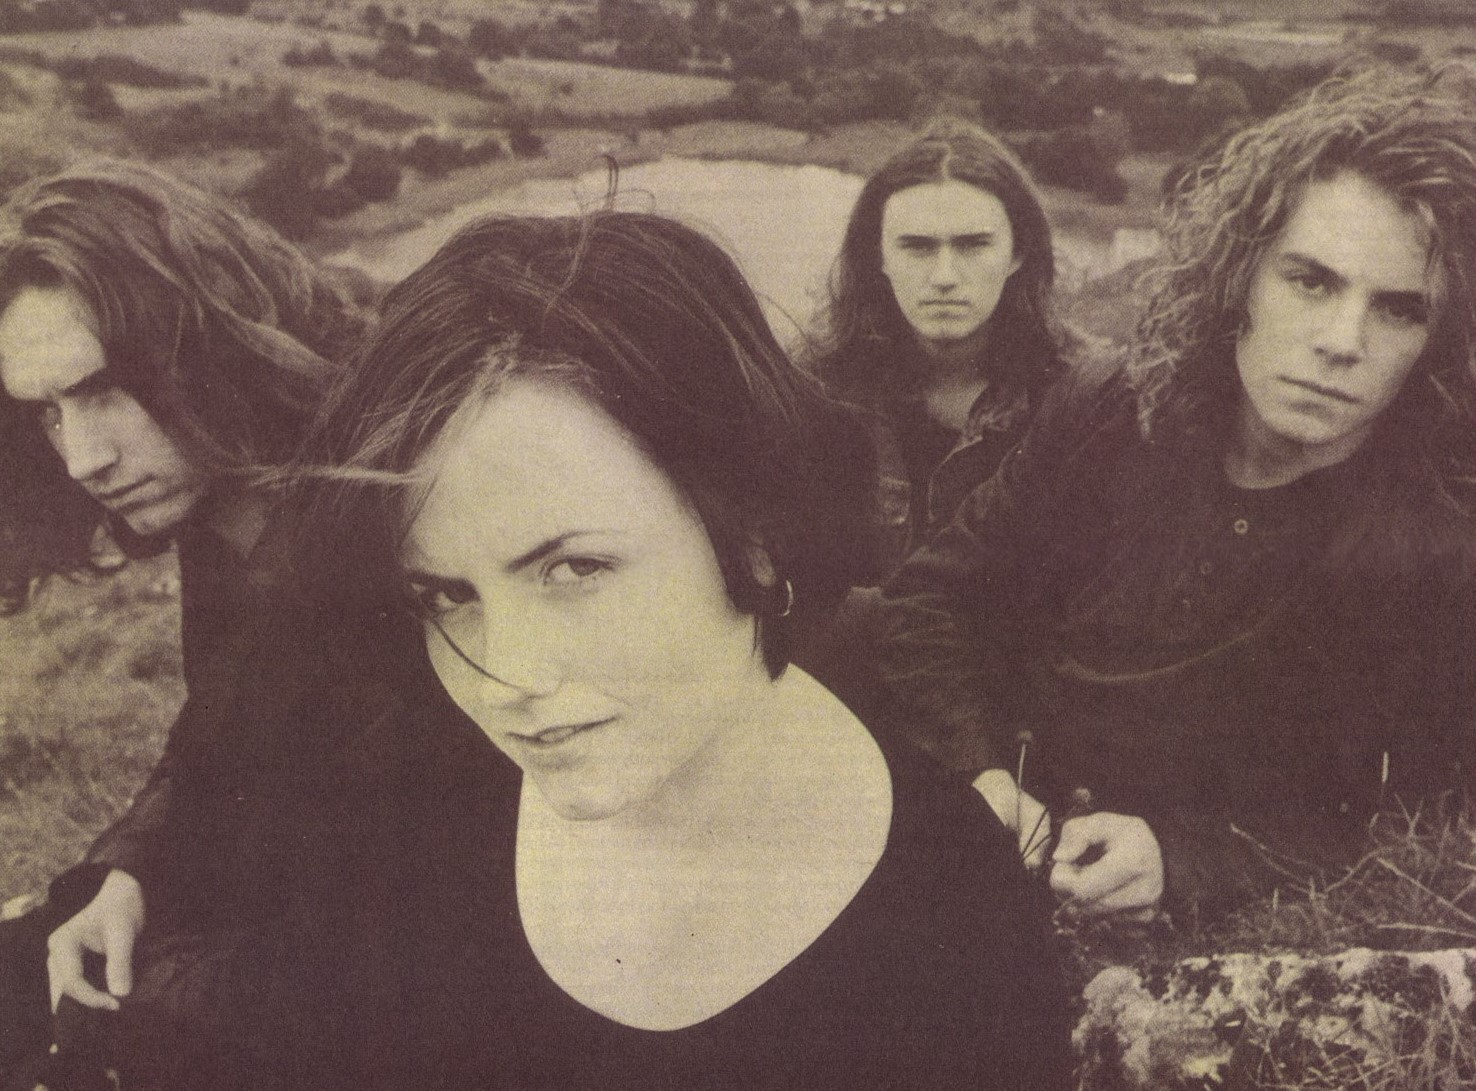 the-cranberries-26th-october-1991-melody-maker (2)